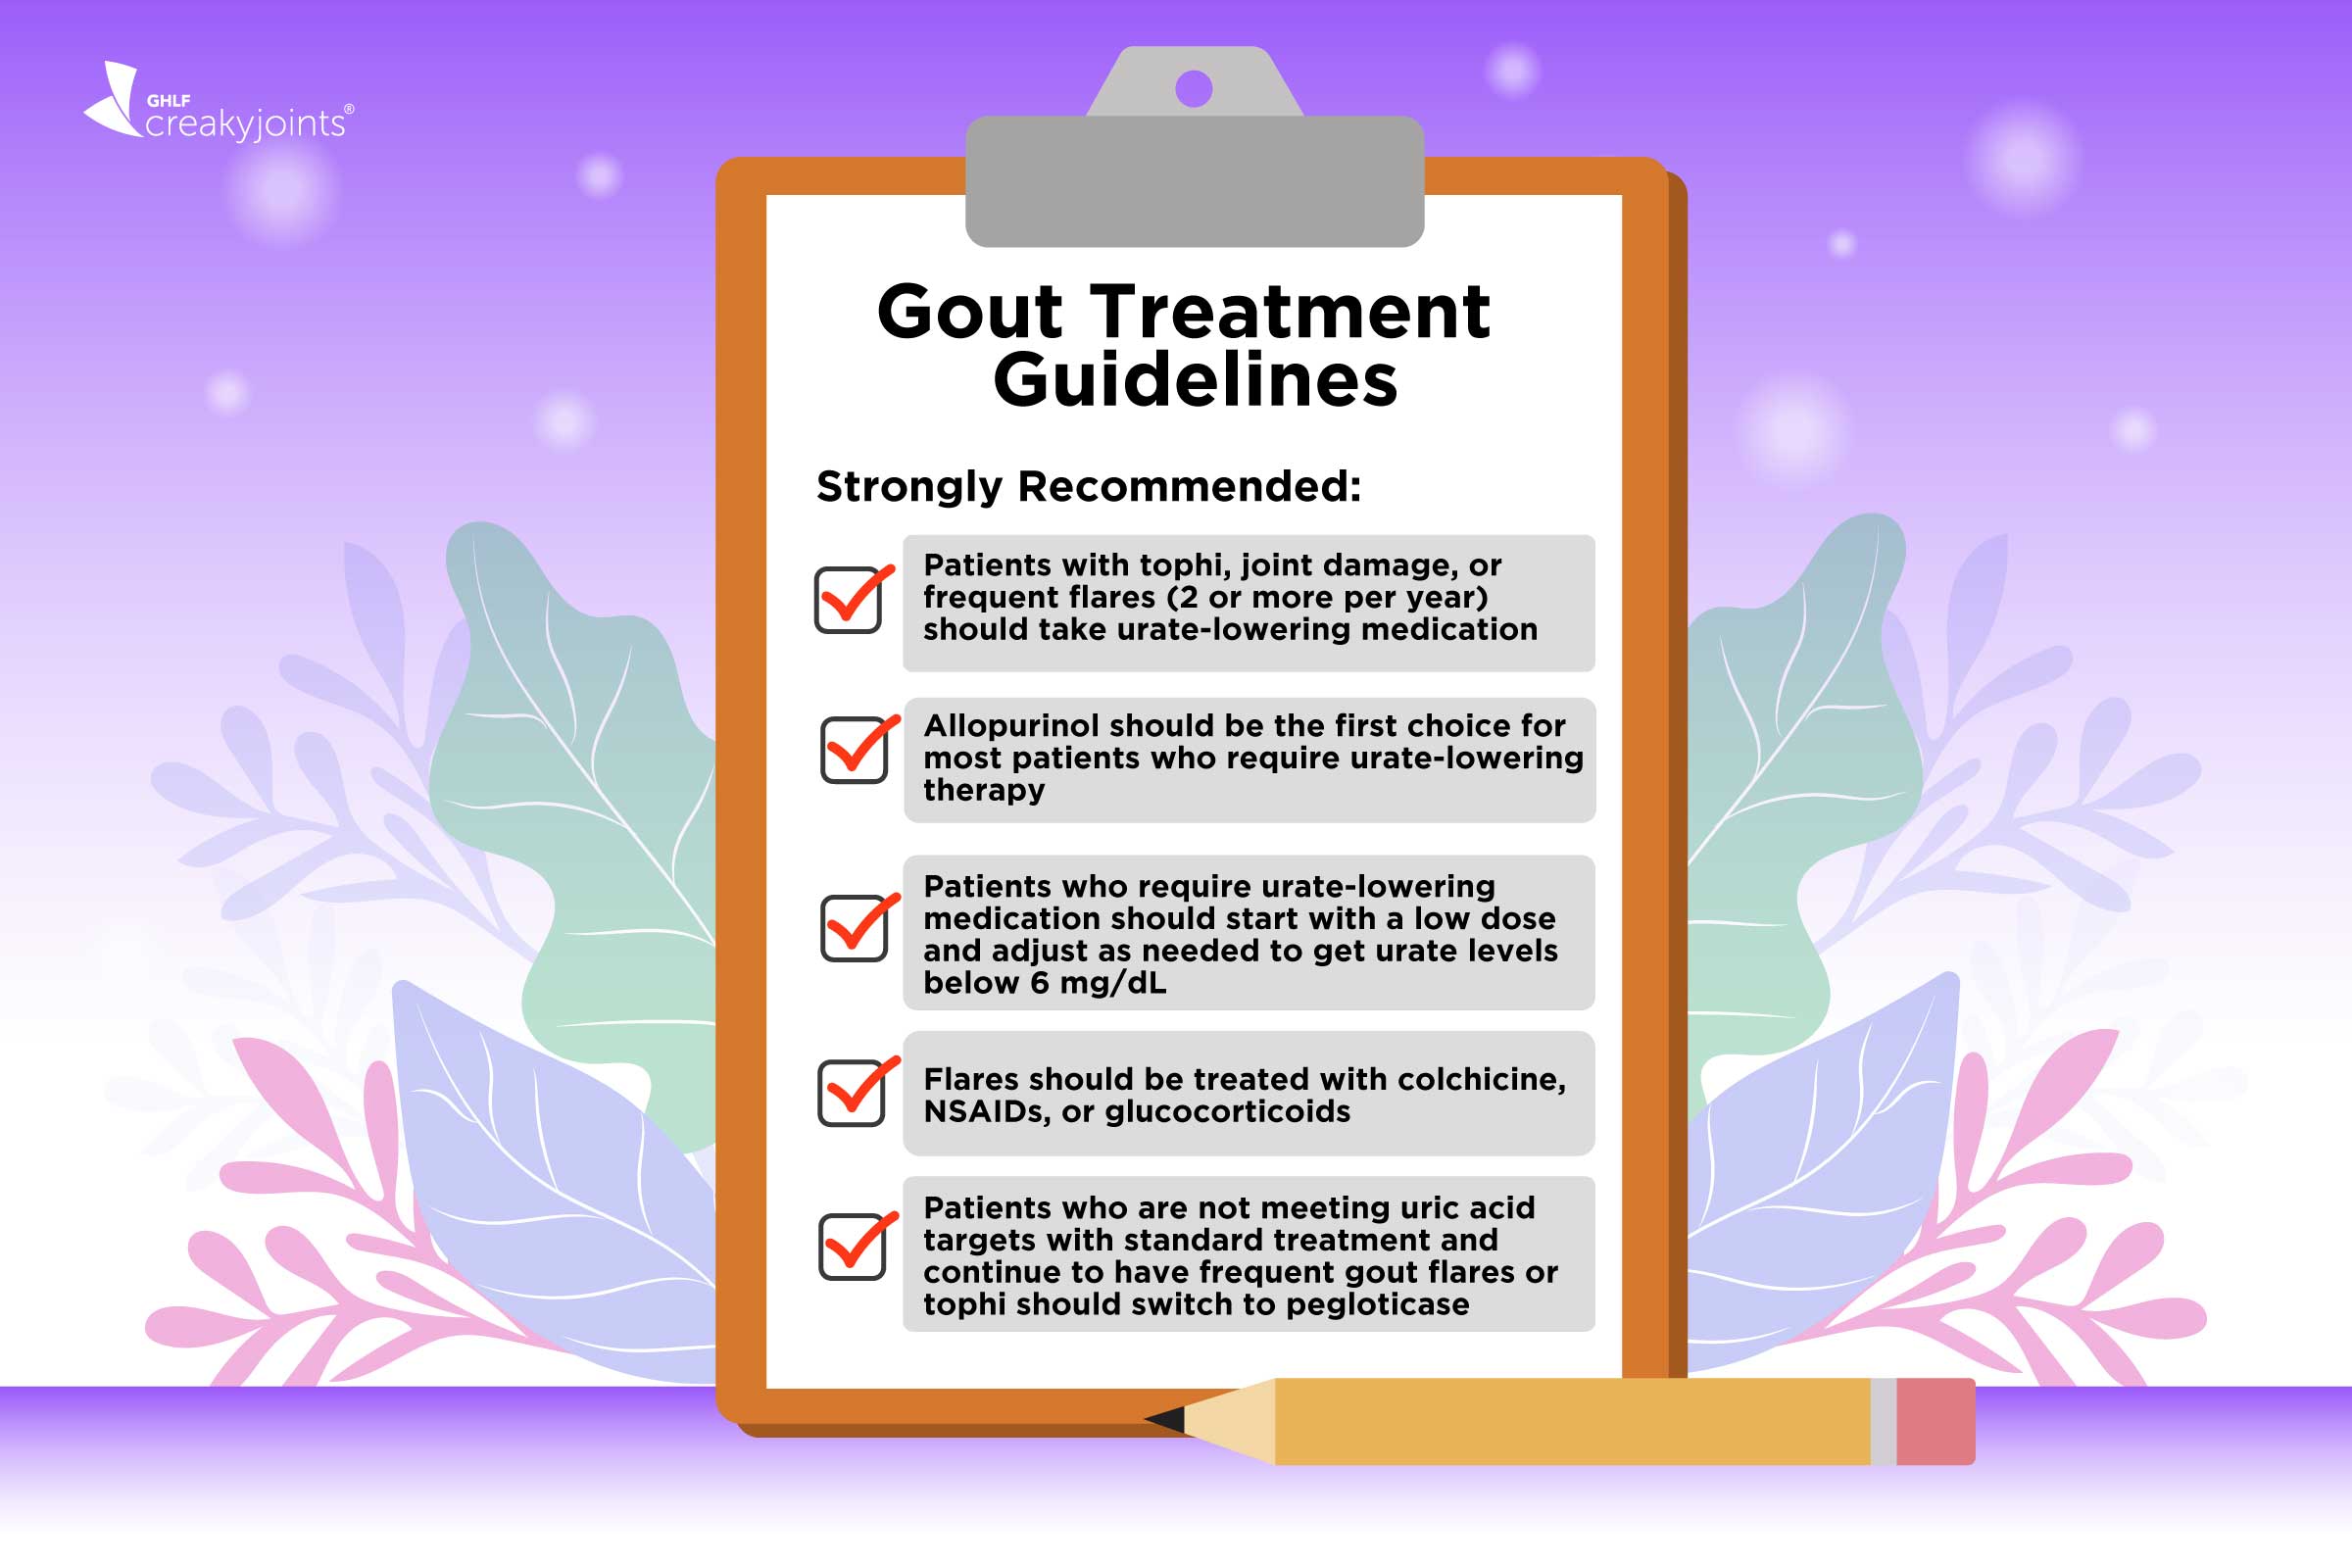 New Gout Treatment Guidelines From The American College Of Rheumatology